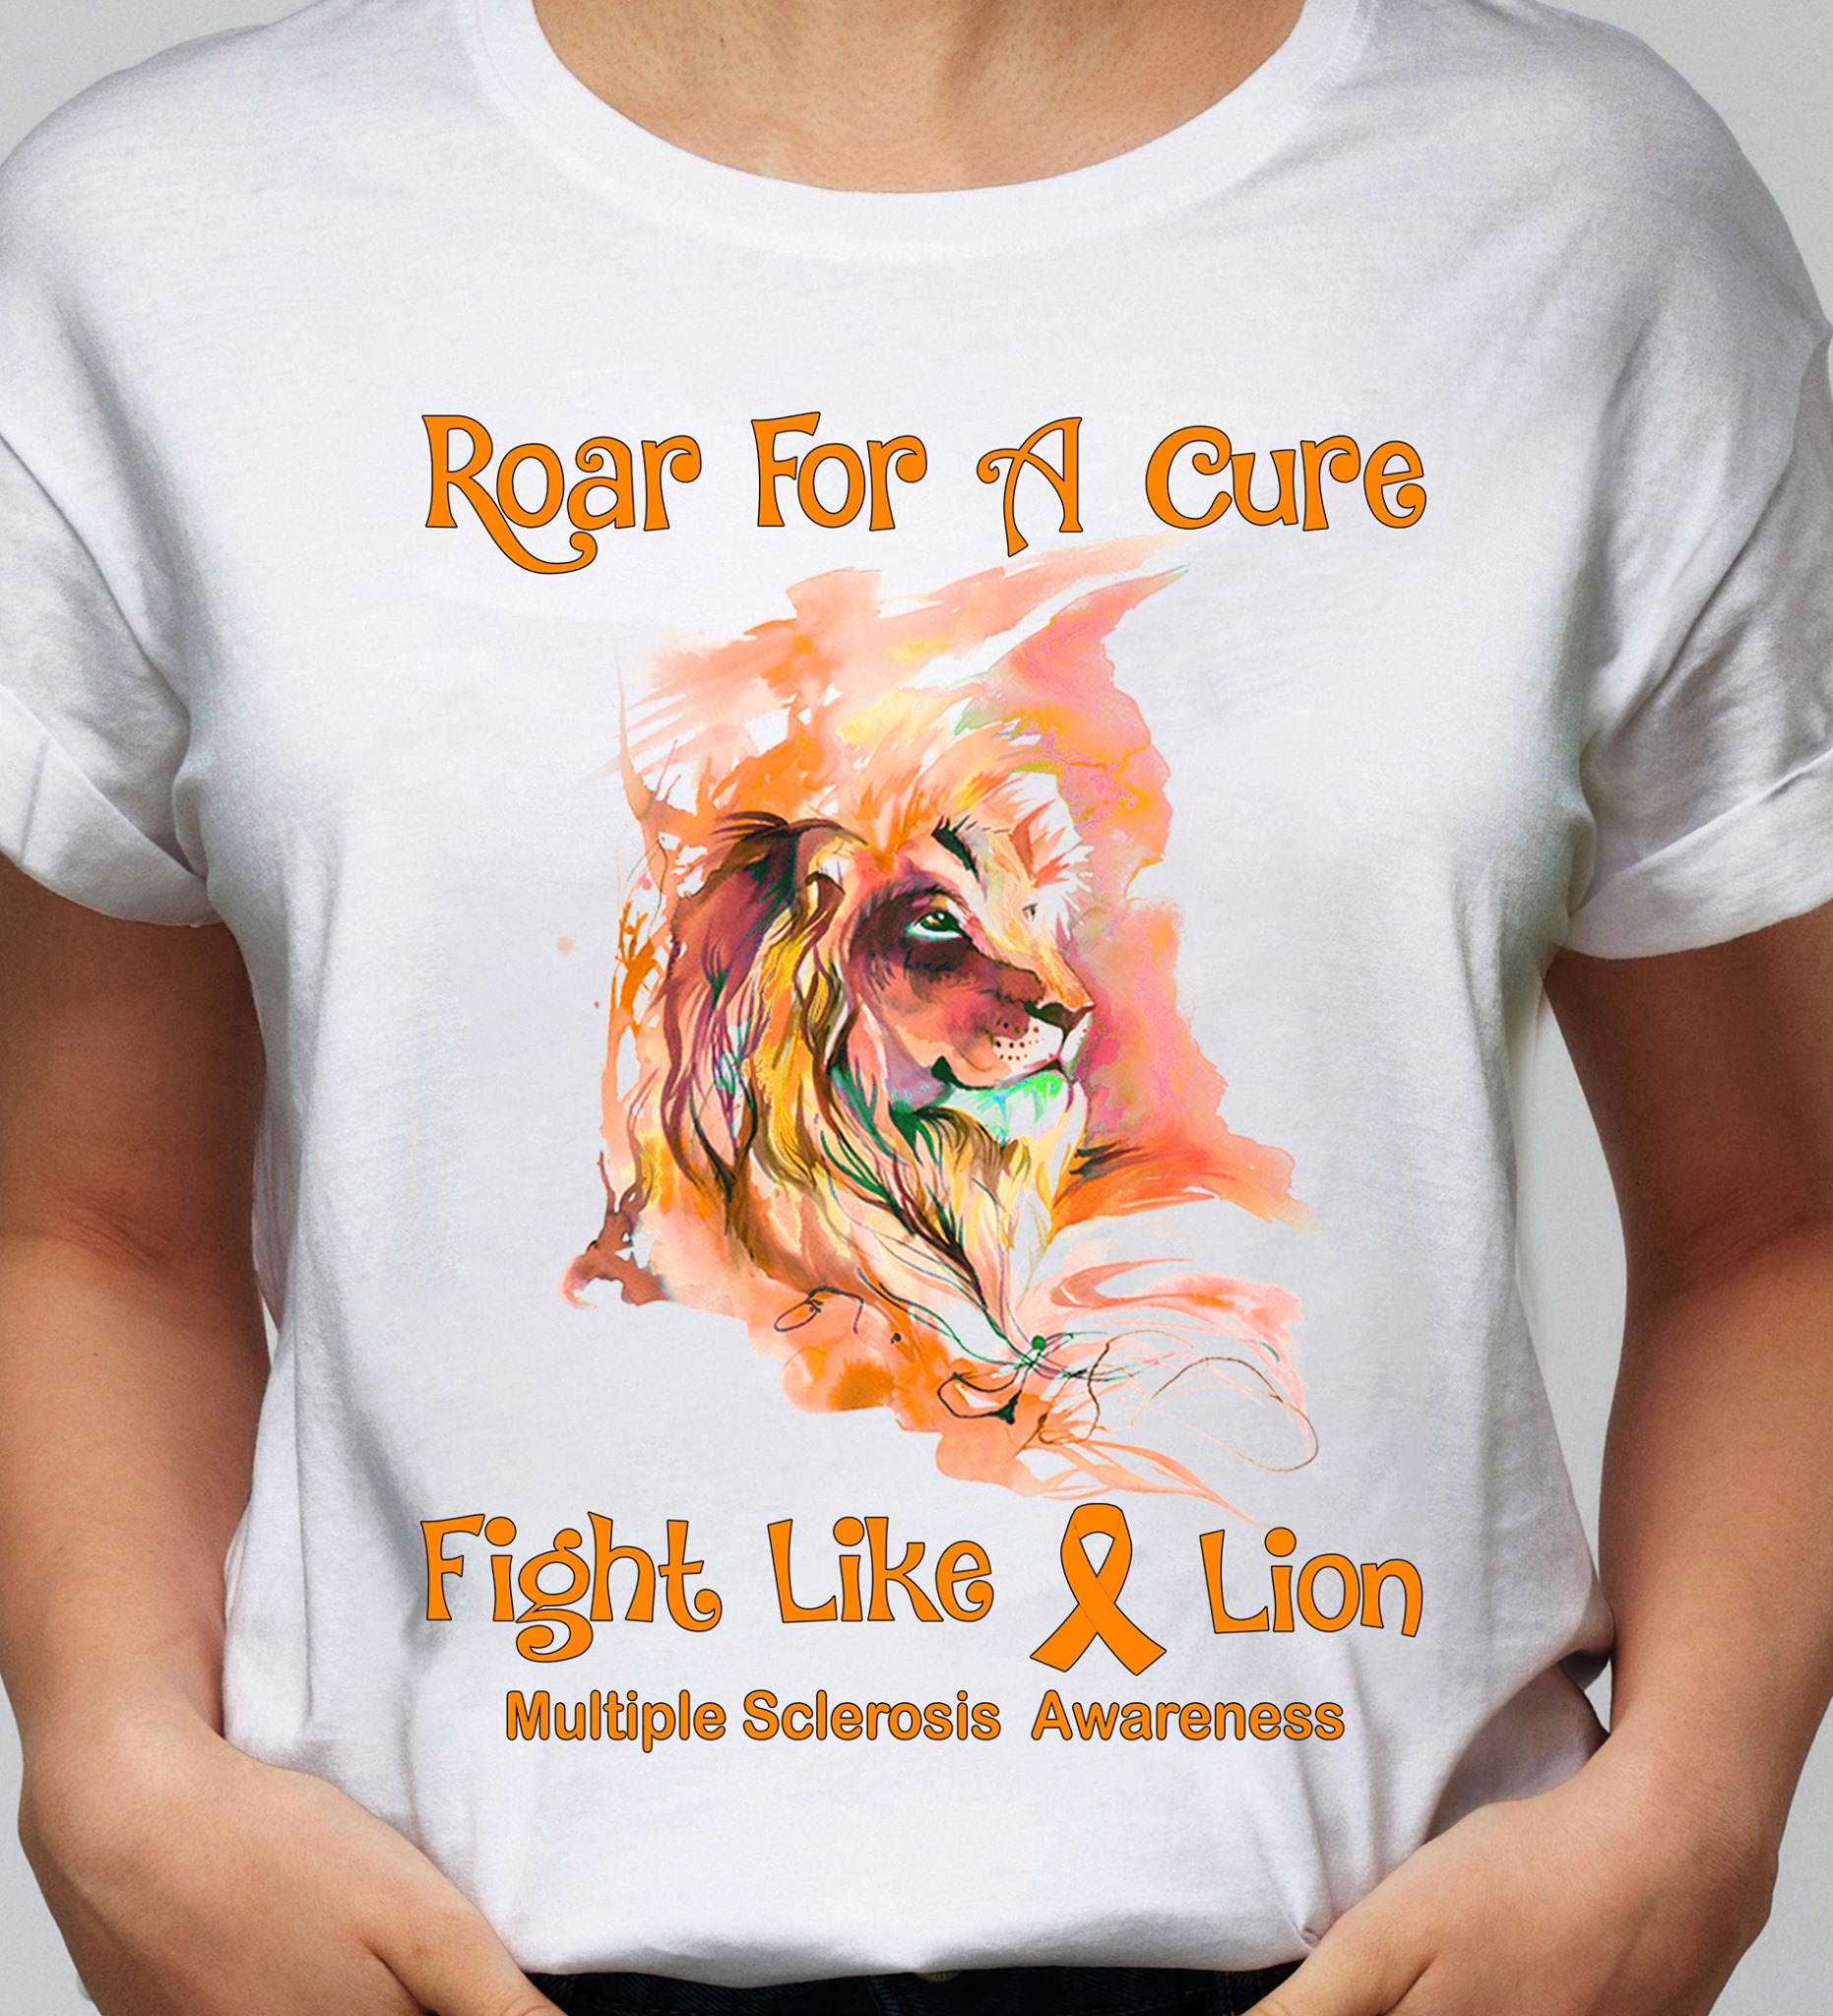 Roar for a cure fight like lion - Multiple sclerosis awareness